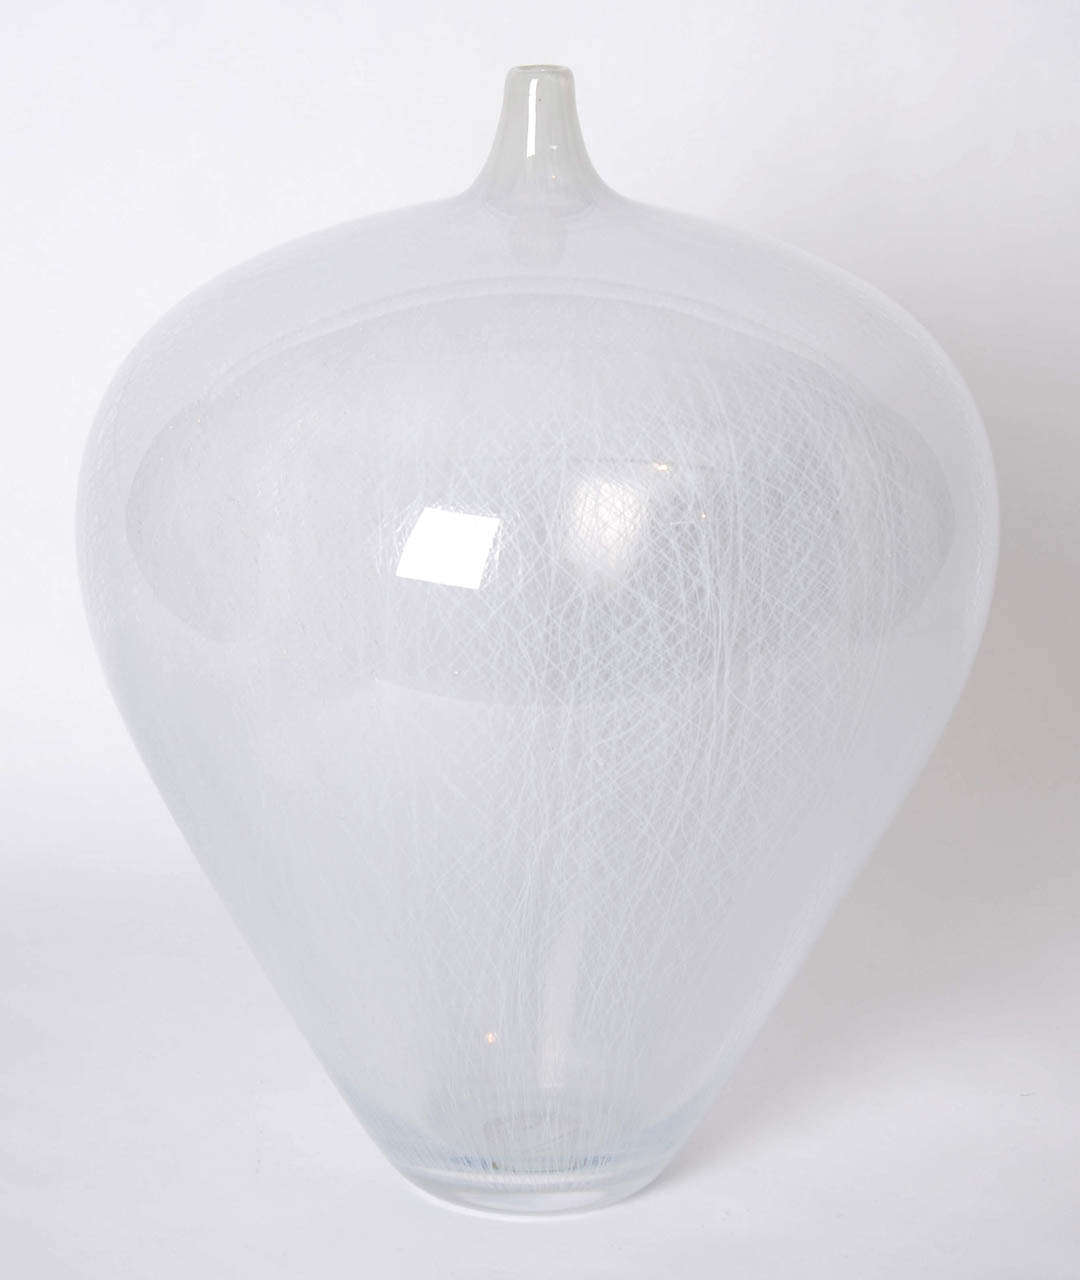 Handblown unique artwork by Vidar Koksvik. Tall clear crystal rounded bottle with thin and intricate white filigree cane pattern.